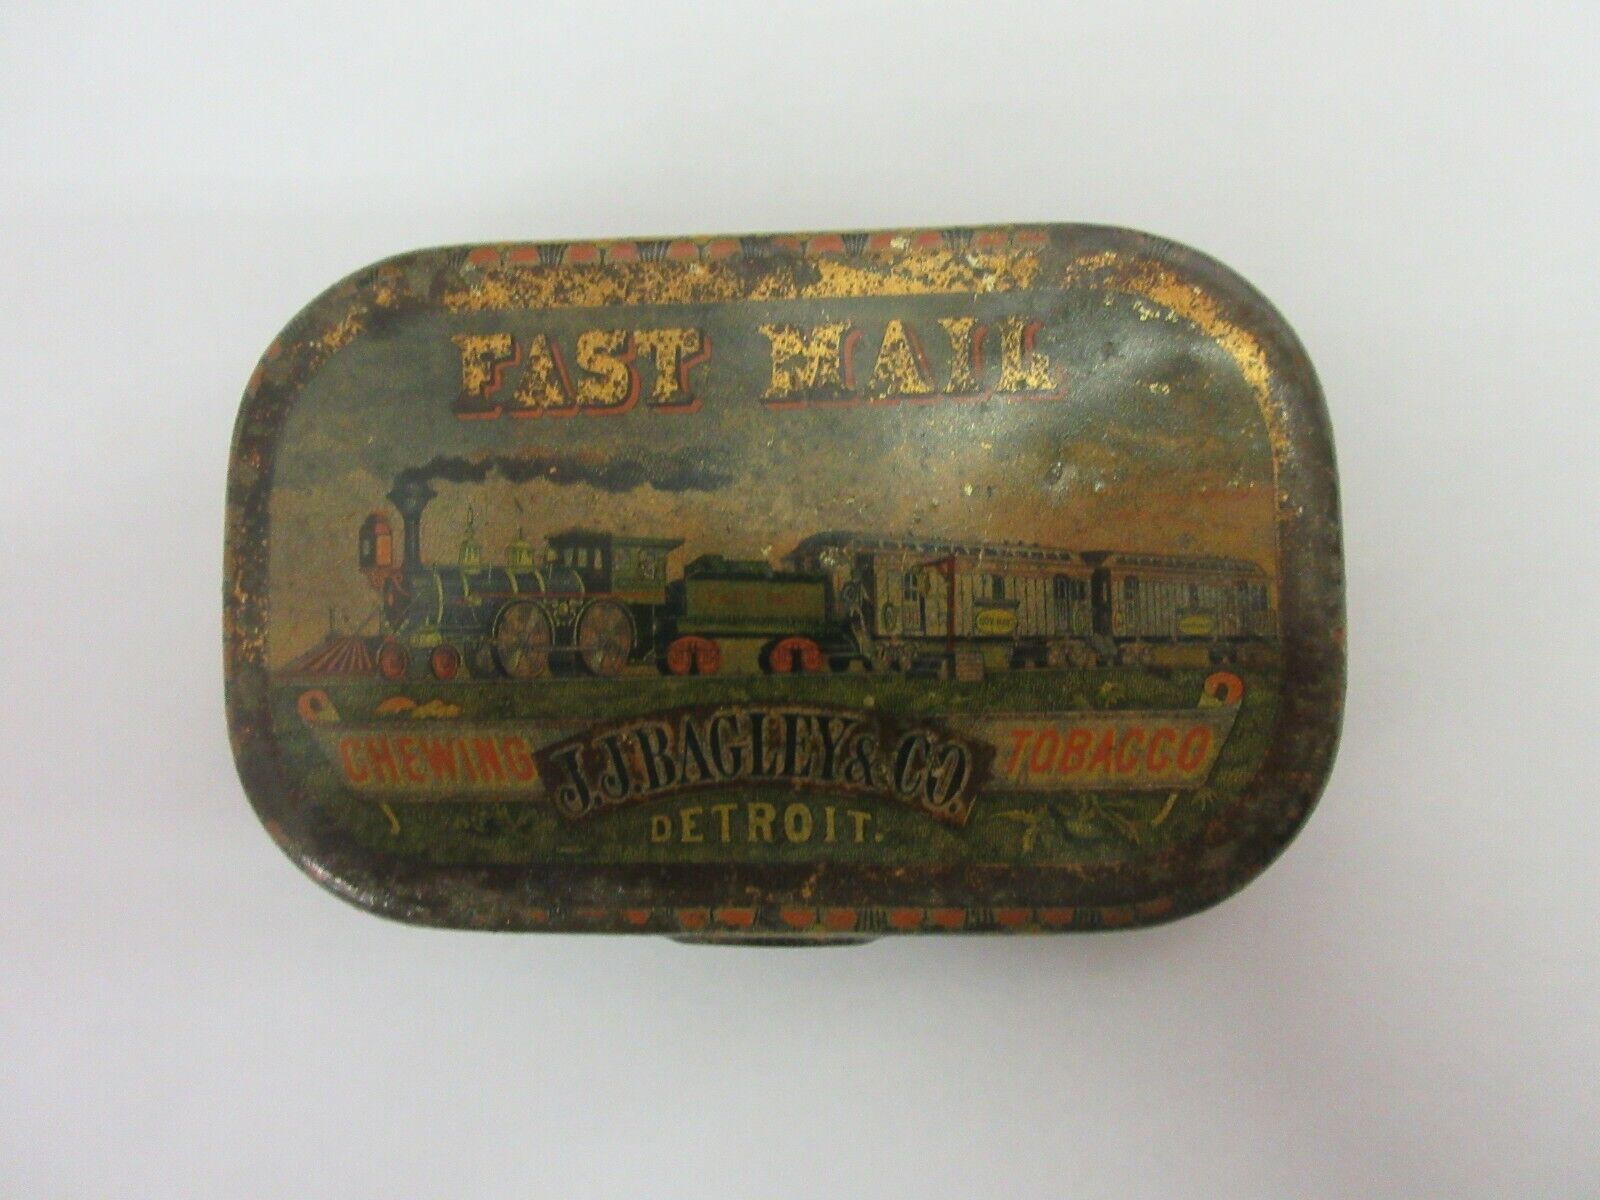 VINTAGE ADVERTISING  EMPTY FAST MAIL FLAT POCKET  TOBACCO TIN  RARE FIND  69-